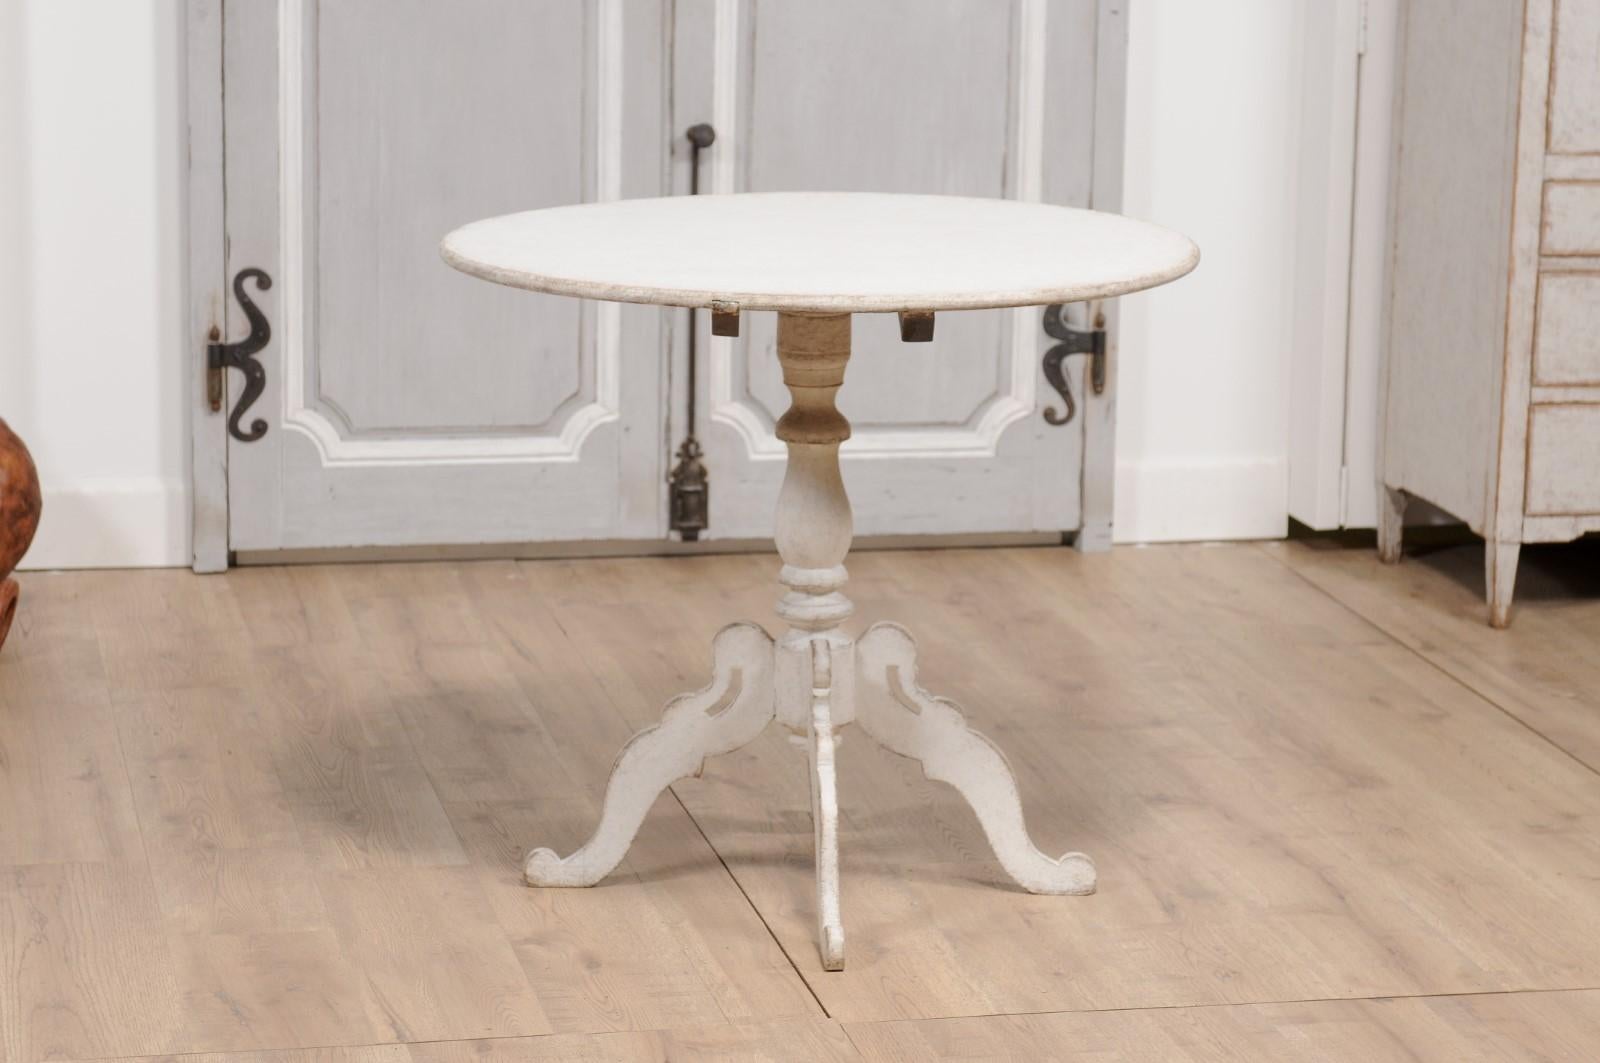 1860s Swedish Light Grey Painted Tilt-Top Table with Round Top and Carved Legs For Sale 6